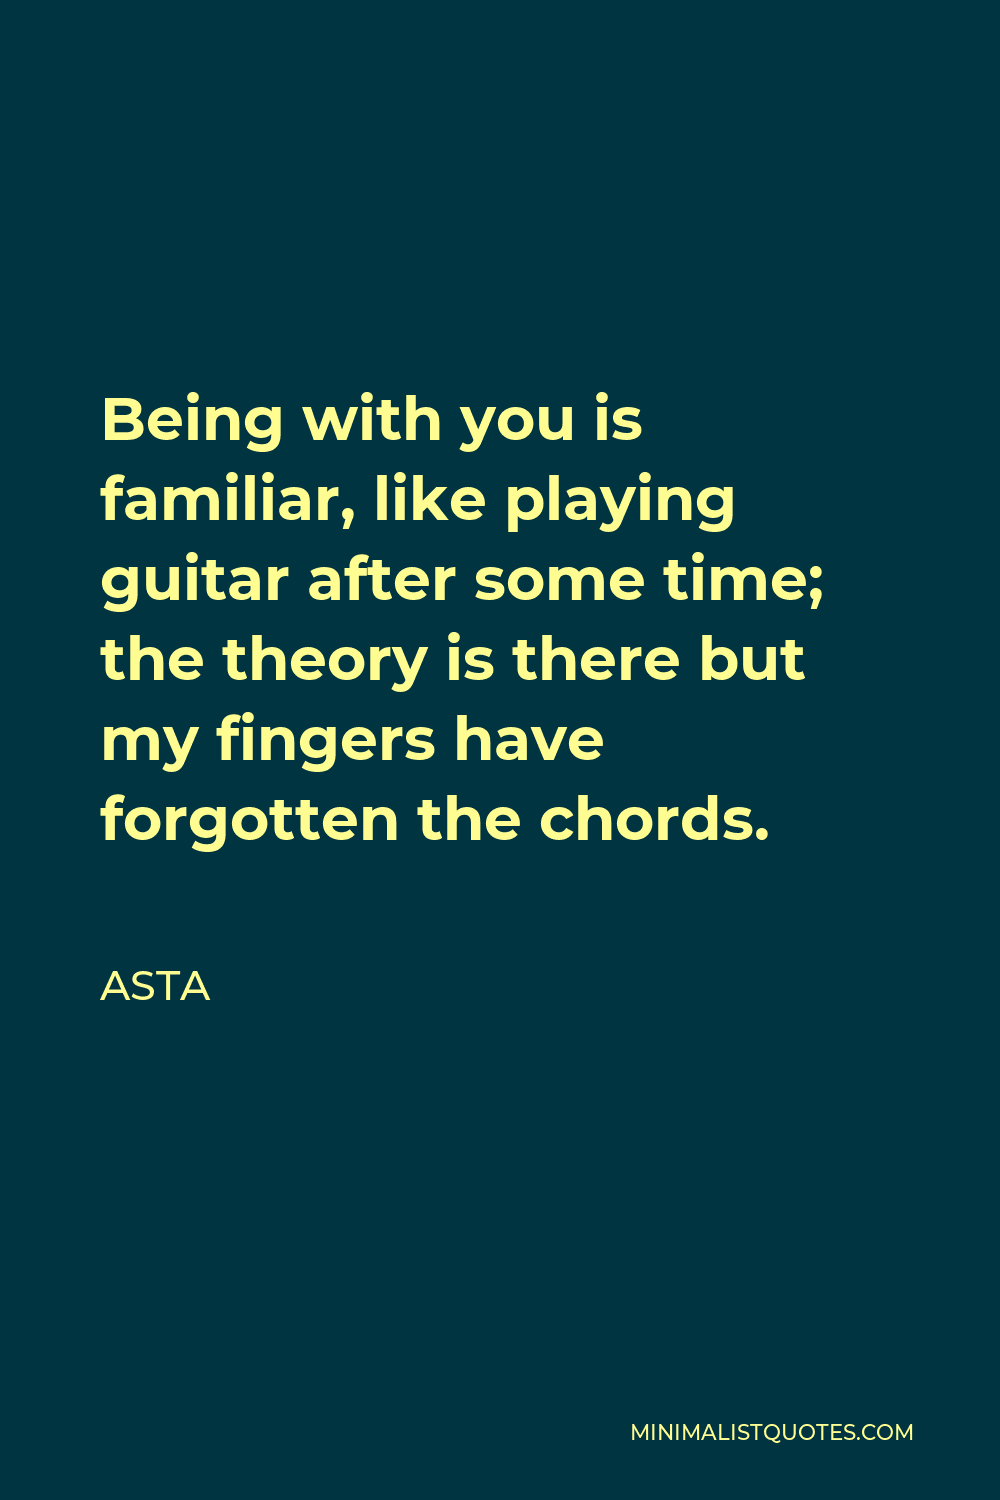 Asta Quote - Being with you is familiar, like playing guitar after some time; the theory is there but my fingers have forgotten the chords.